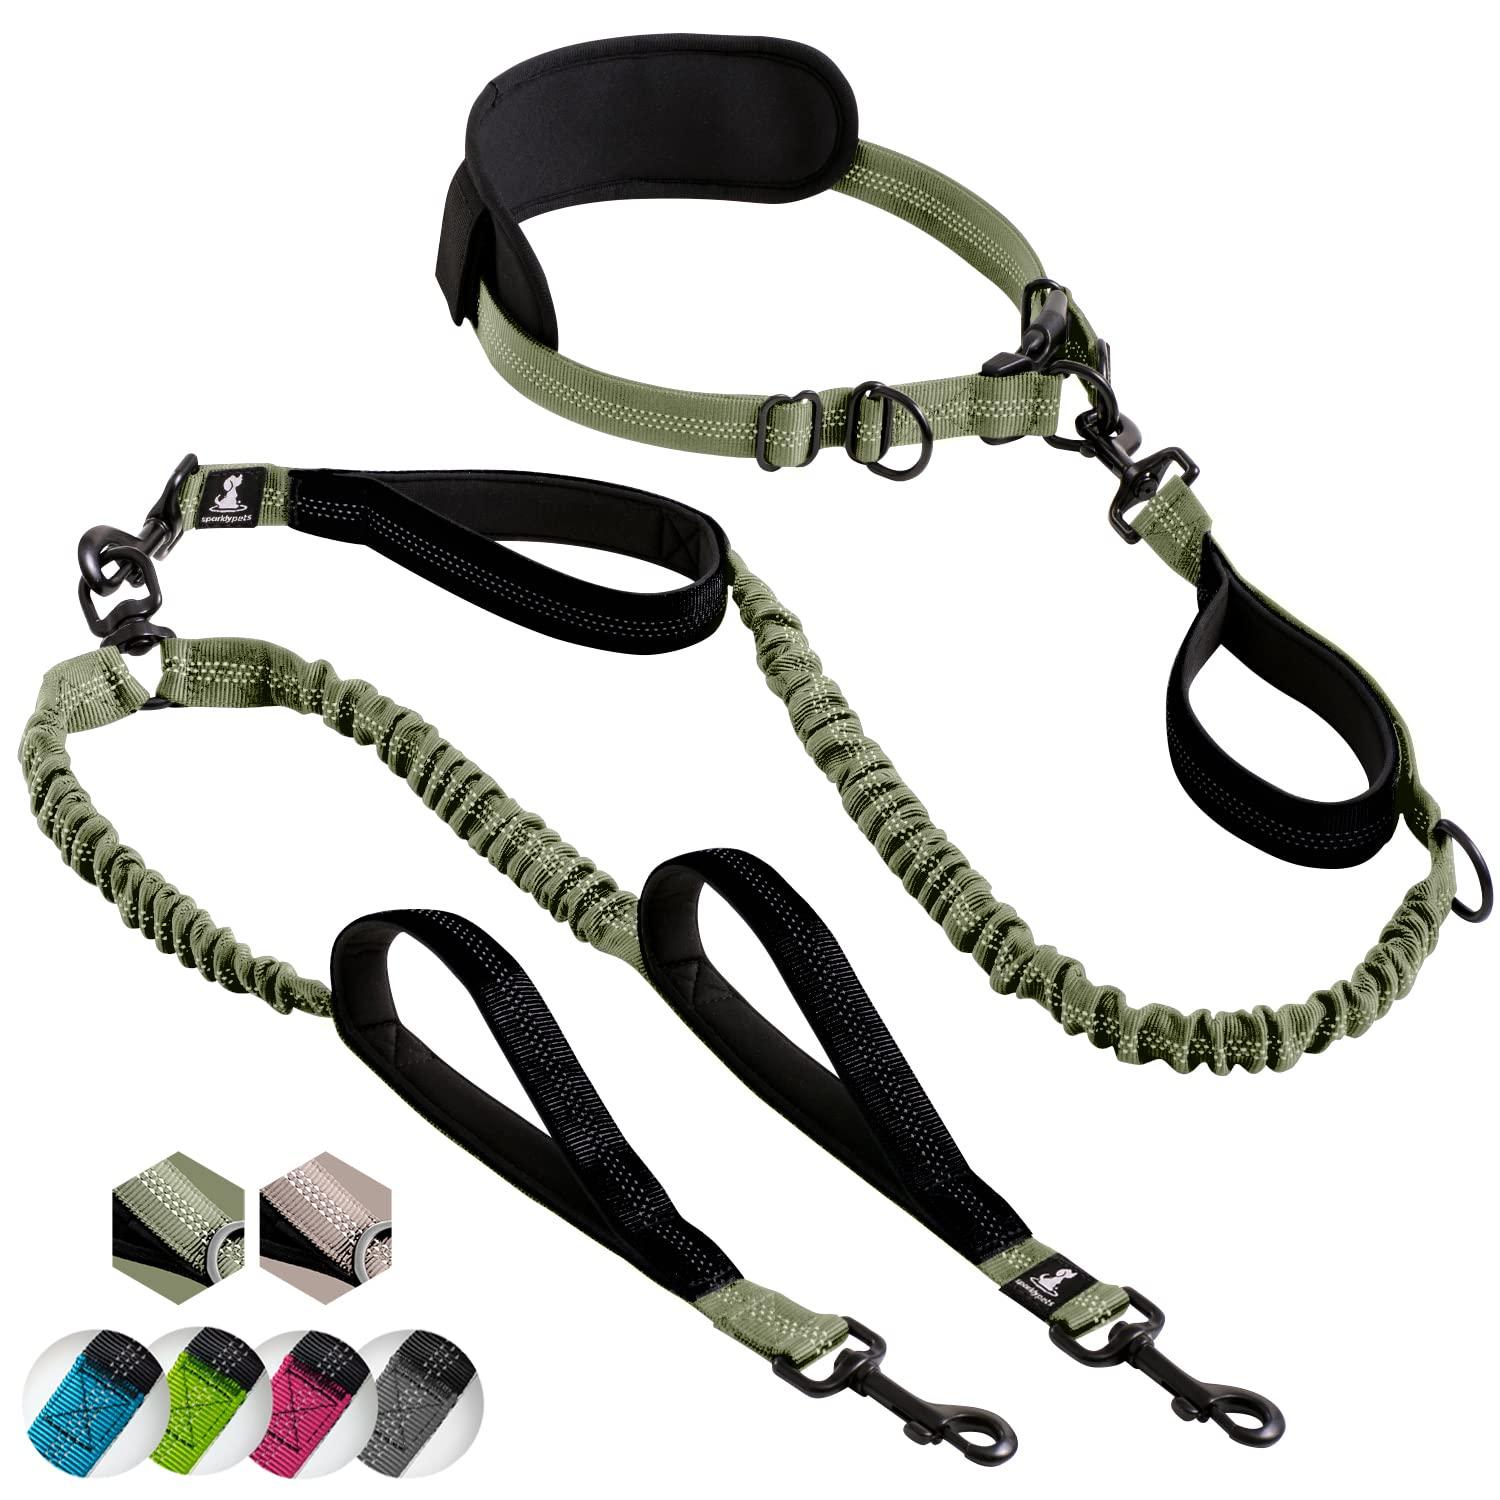 SparklyPets Hands Free Double Dog Leash - Dual Dog Leash for Medium and Large Dogs - Dog Leash for 2 Dogs with Padded Handles, Reflective Stitches, No Pull, Tangle Free (Green Range, for 2 Dogs)